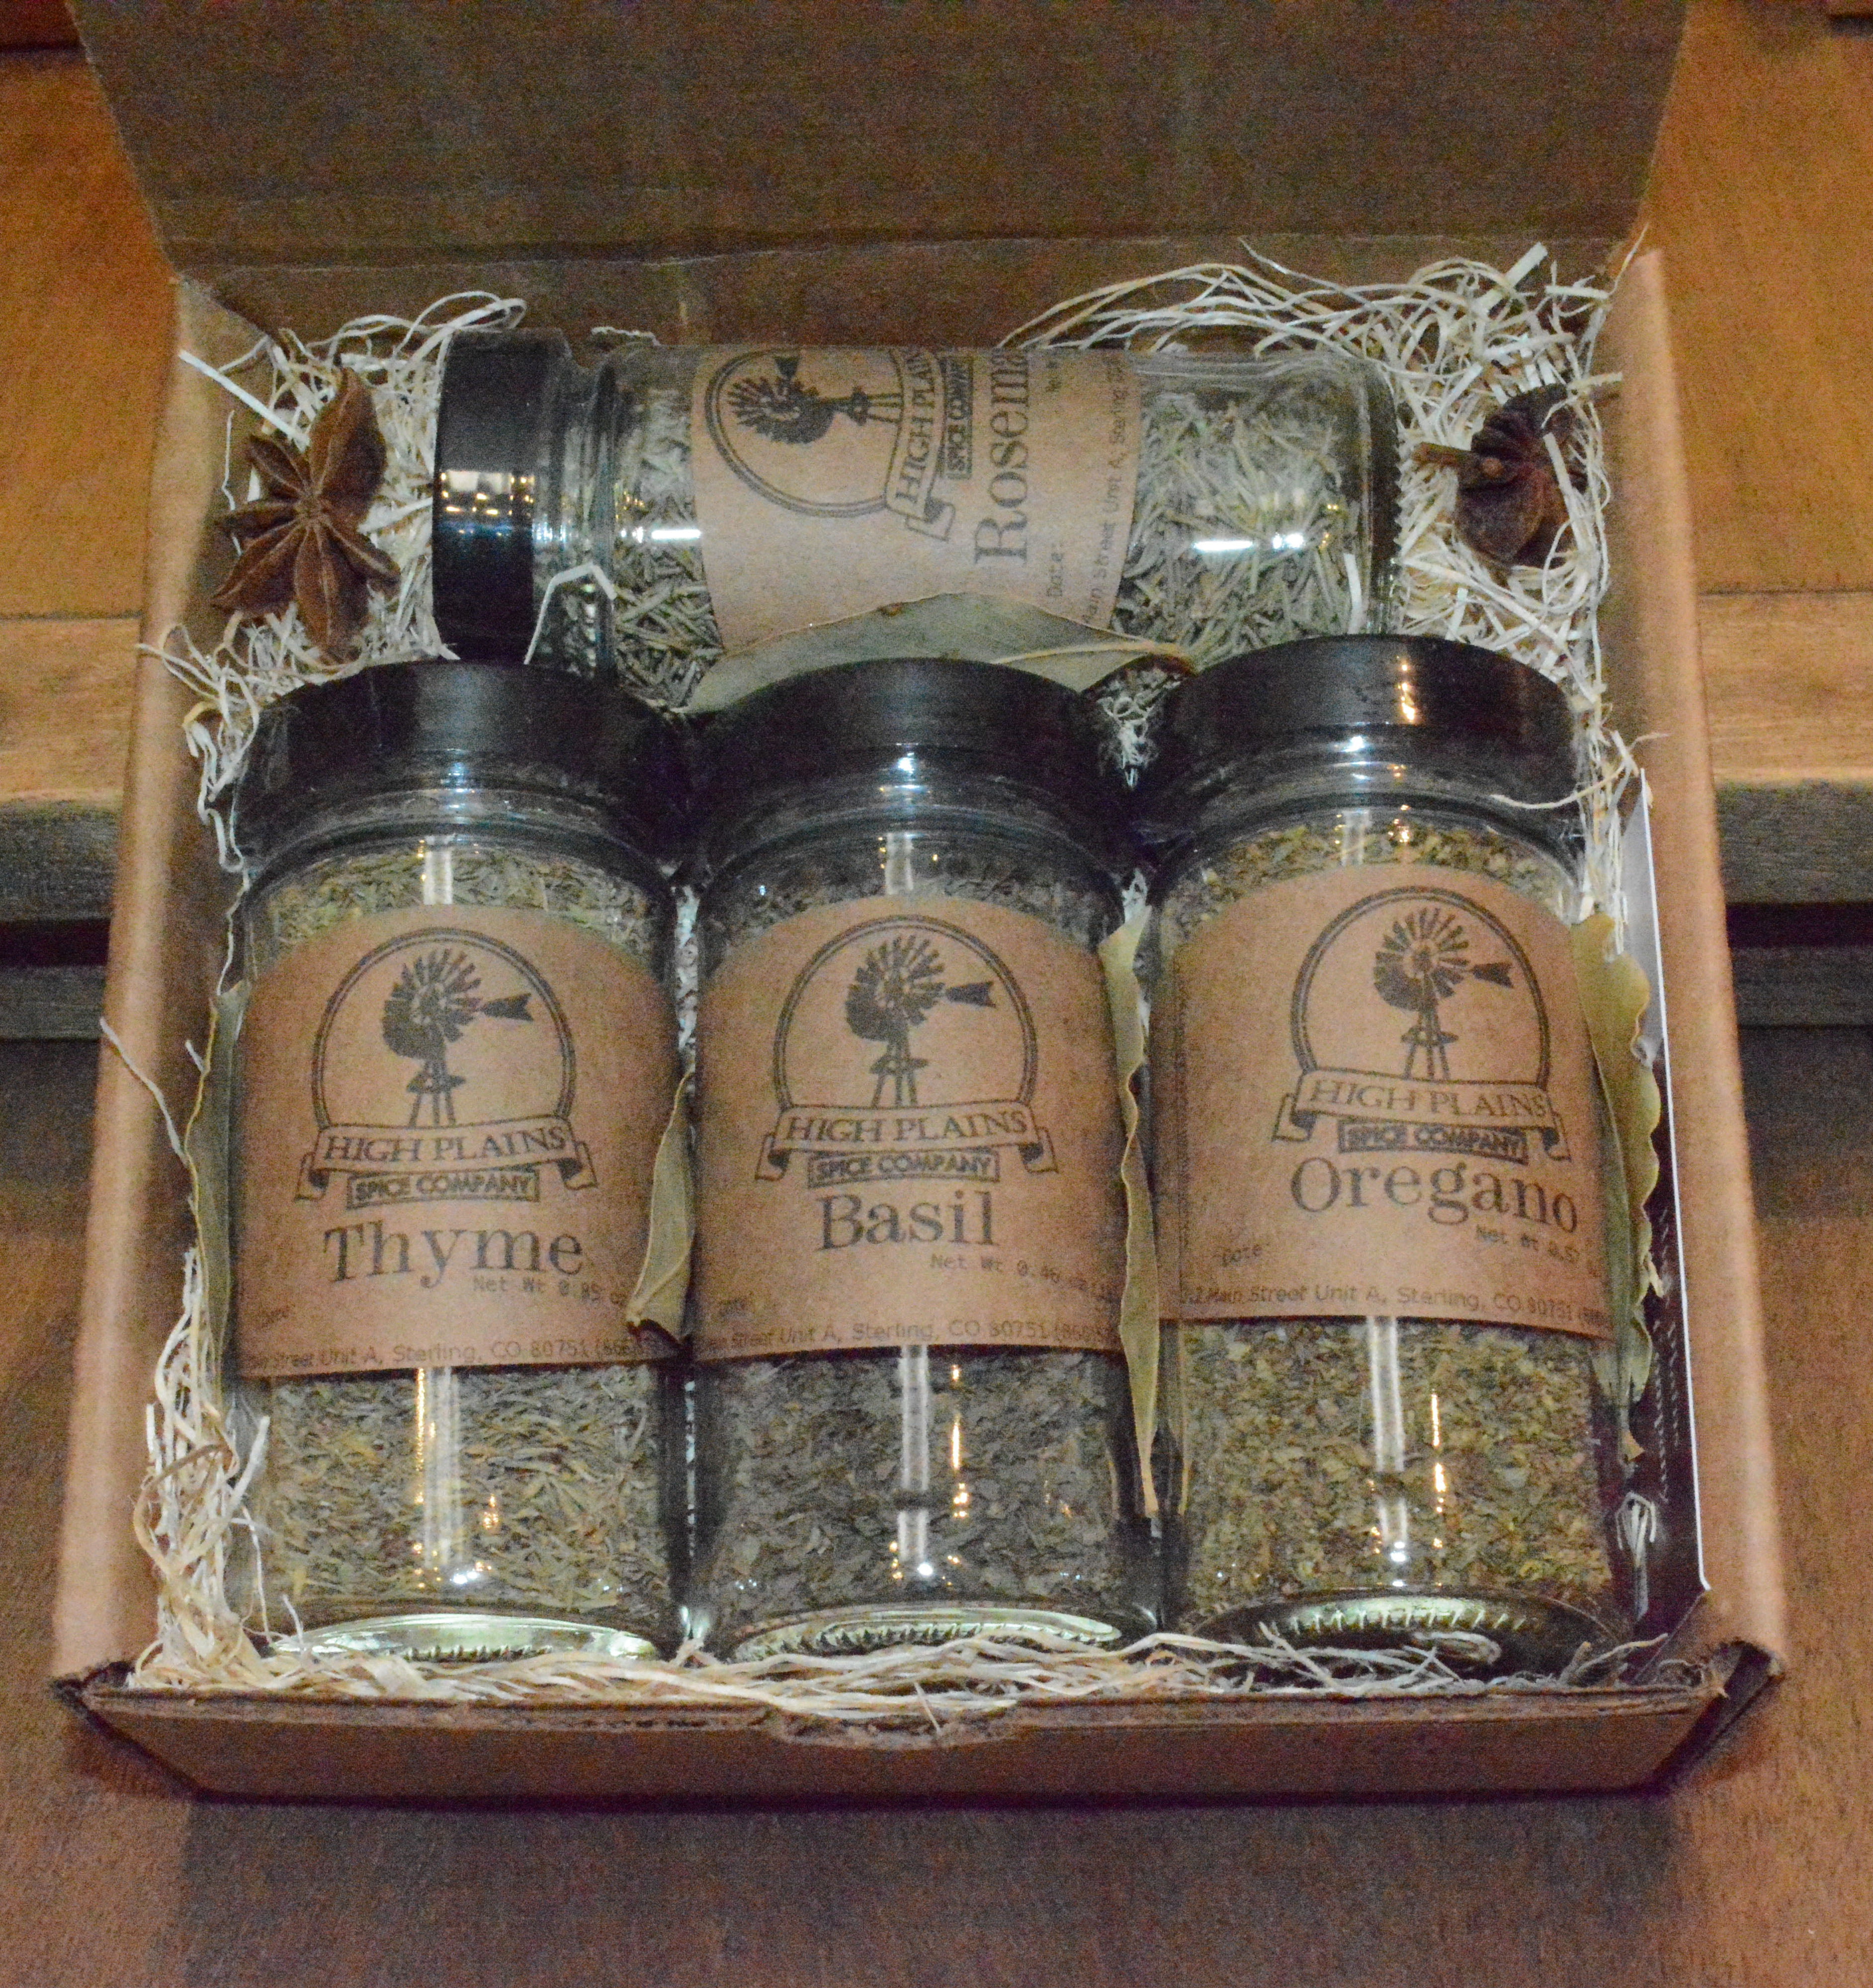 Spice & Seasoning Gift Sets: Rubs, Organic Spices, Herbs – Whole